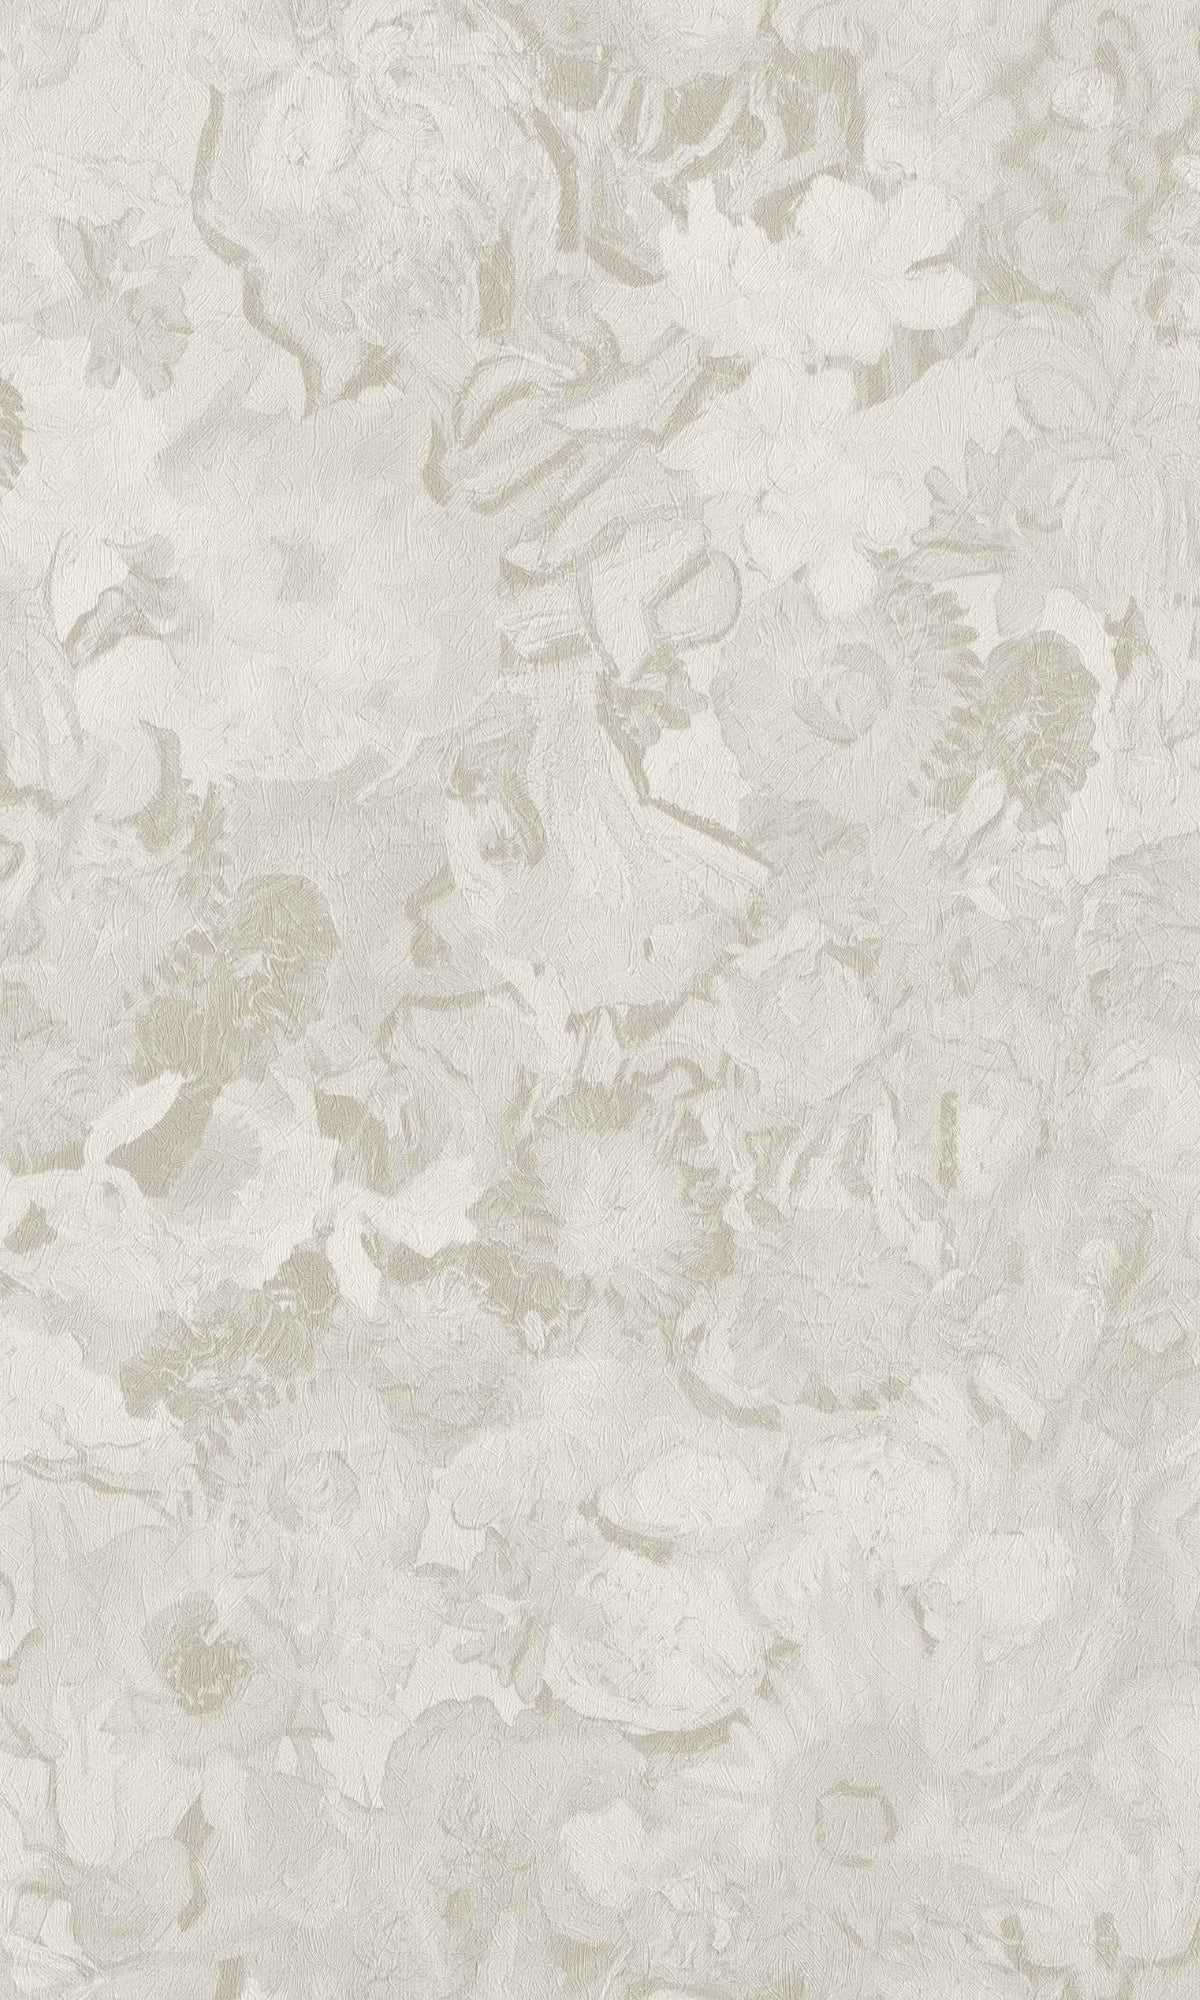 Cream Abstract Watercolor Floral Painted Wallpaper R8447